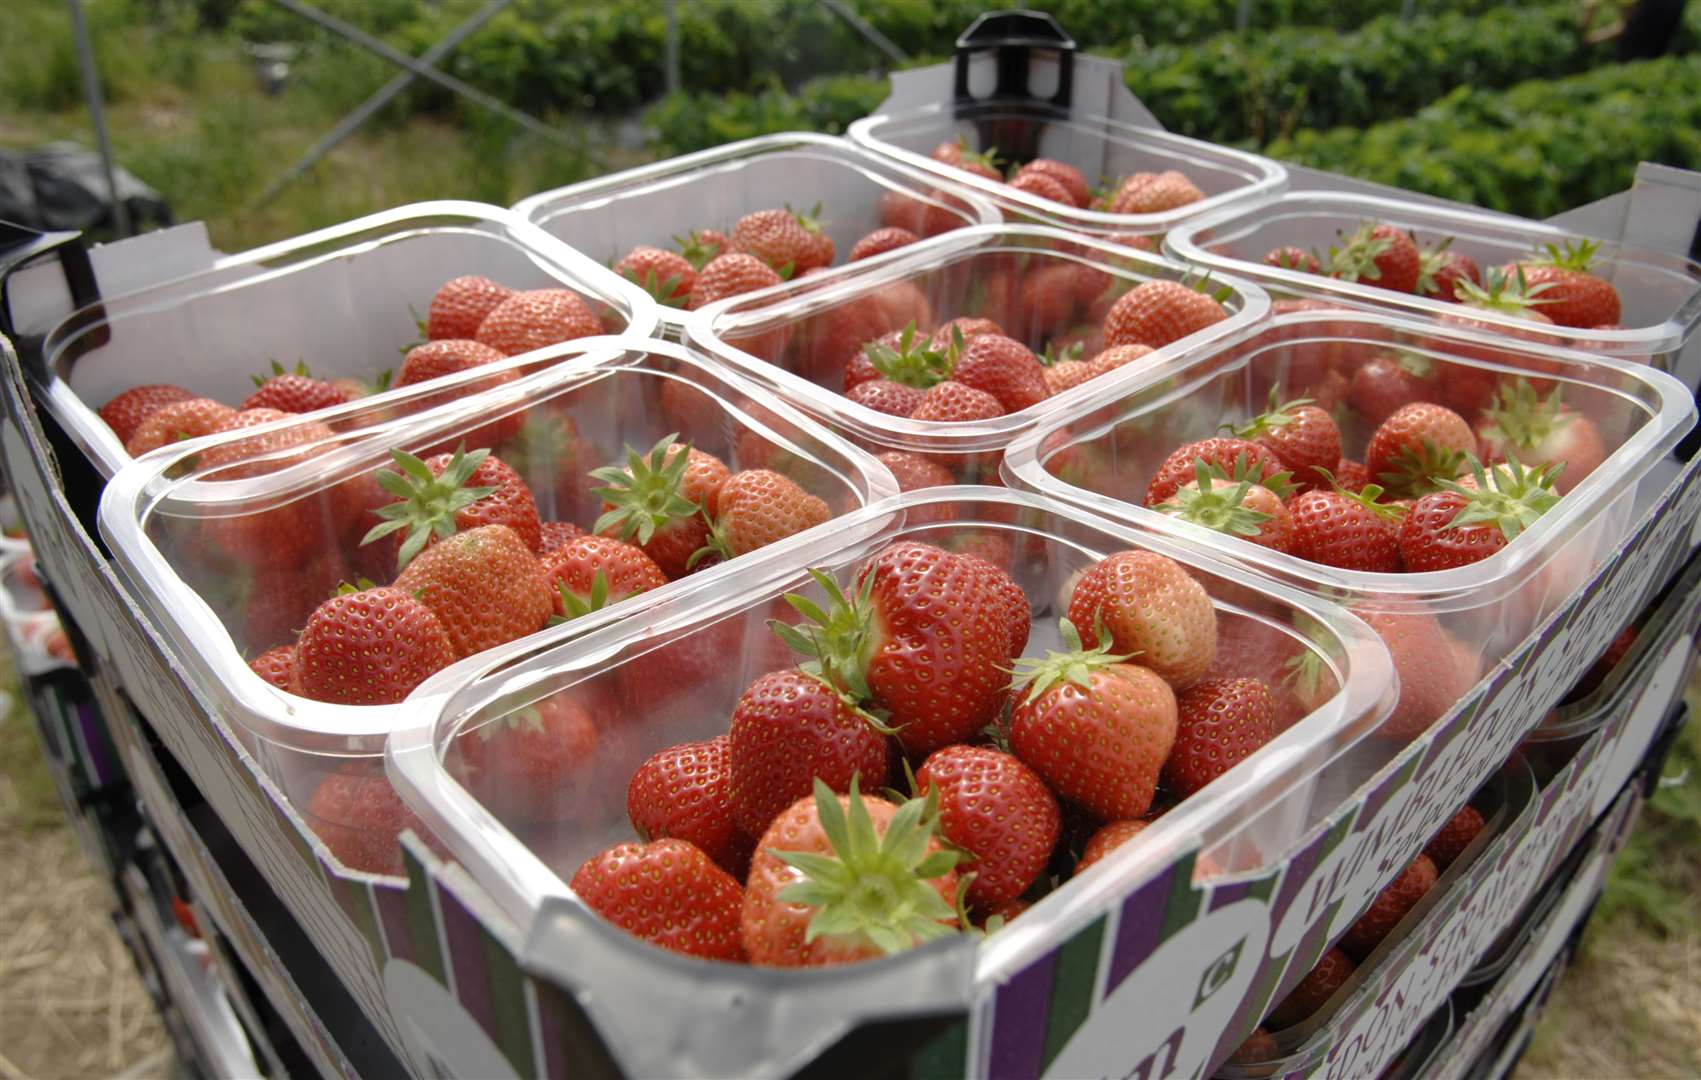 Strawberries from Hugh Lowe Farms have headed to Wimbledon once again this year. Picture: Matthew Reading